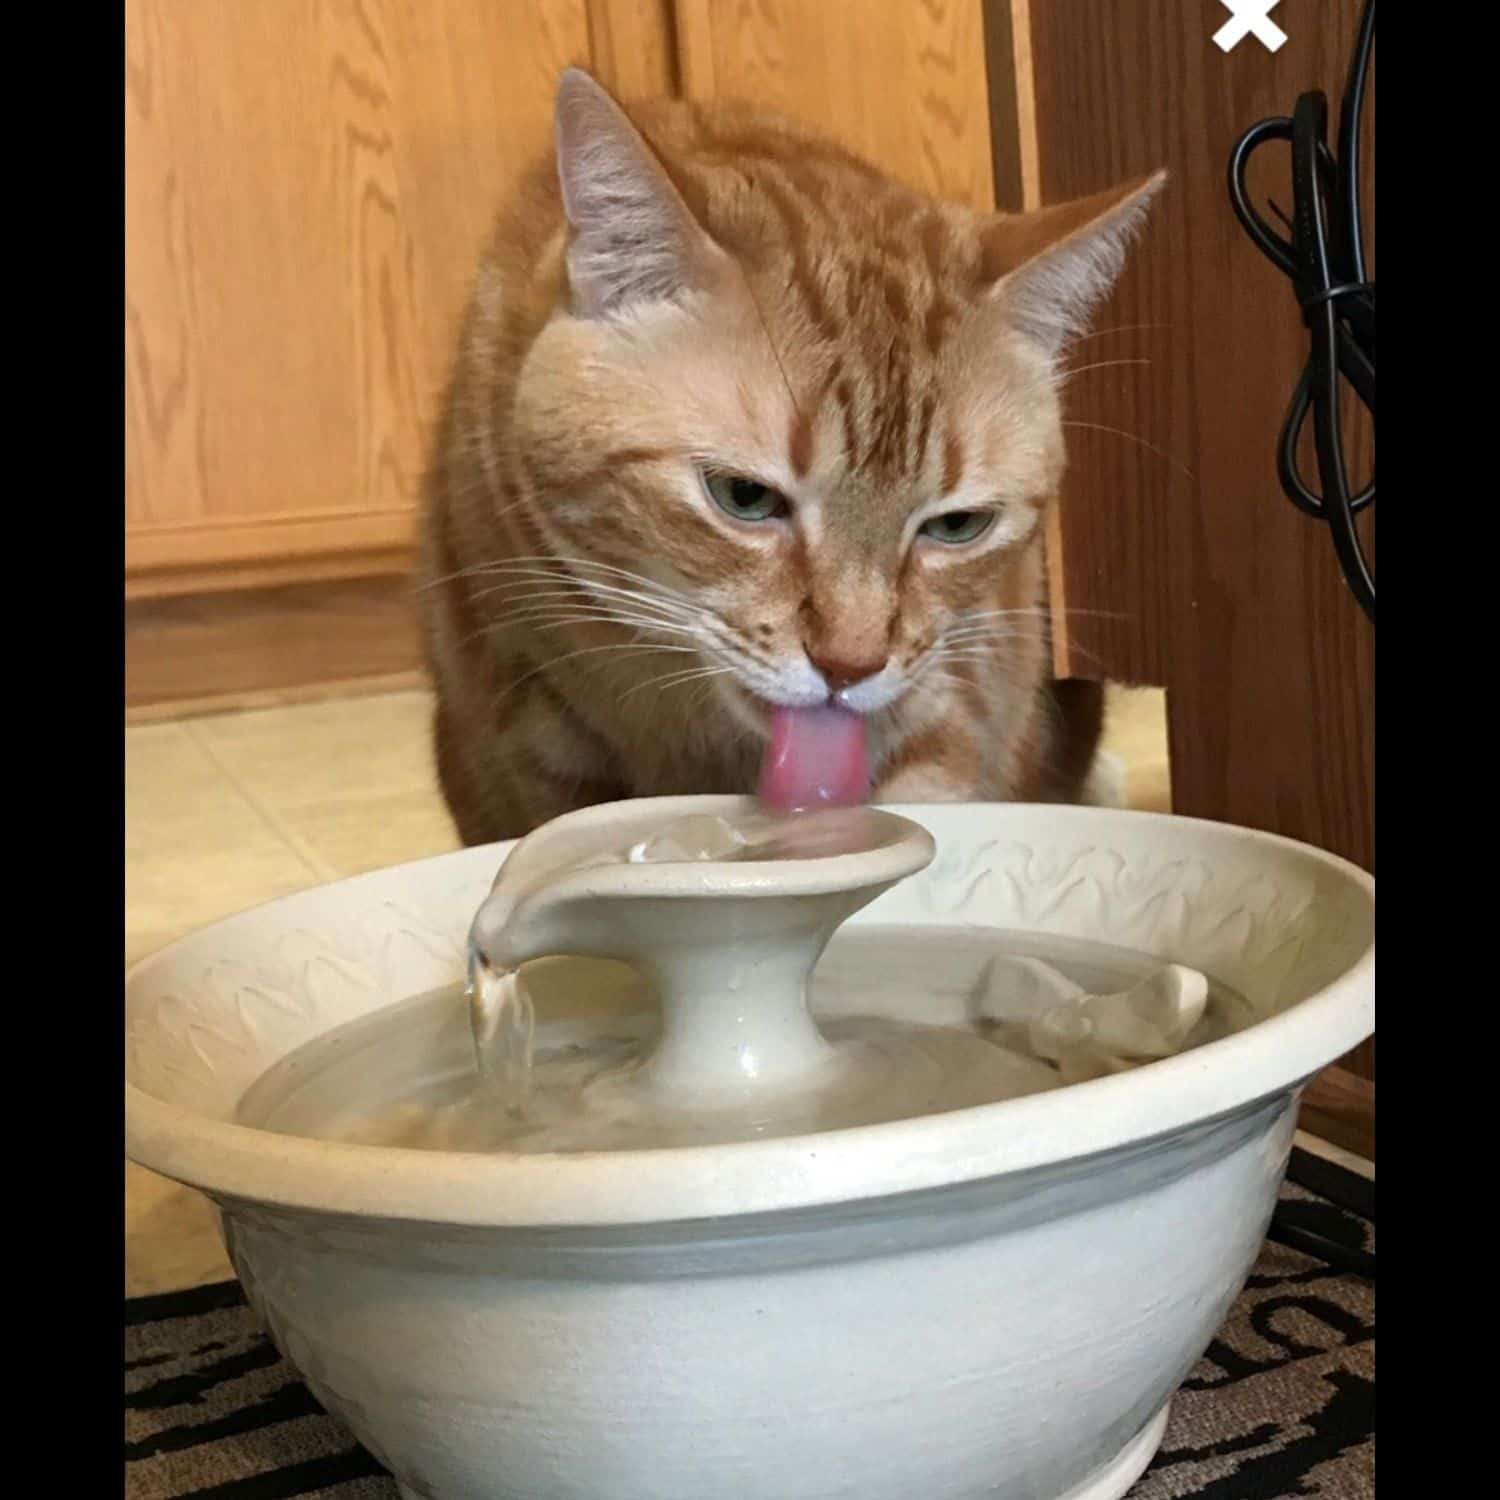 WetWhiskersFountains shared a new photo on Etsy